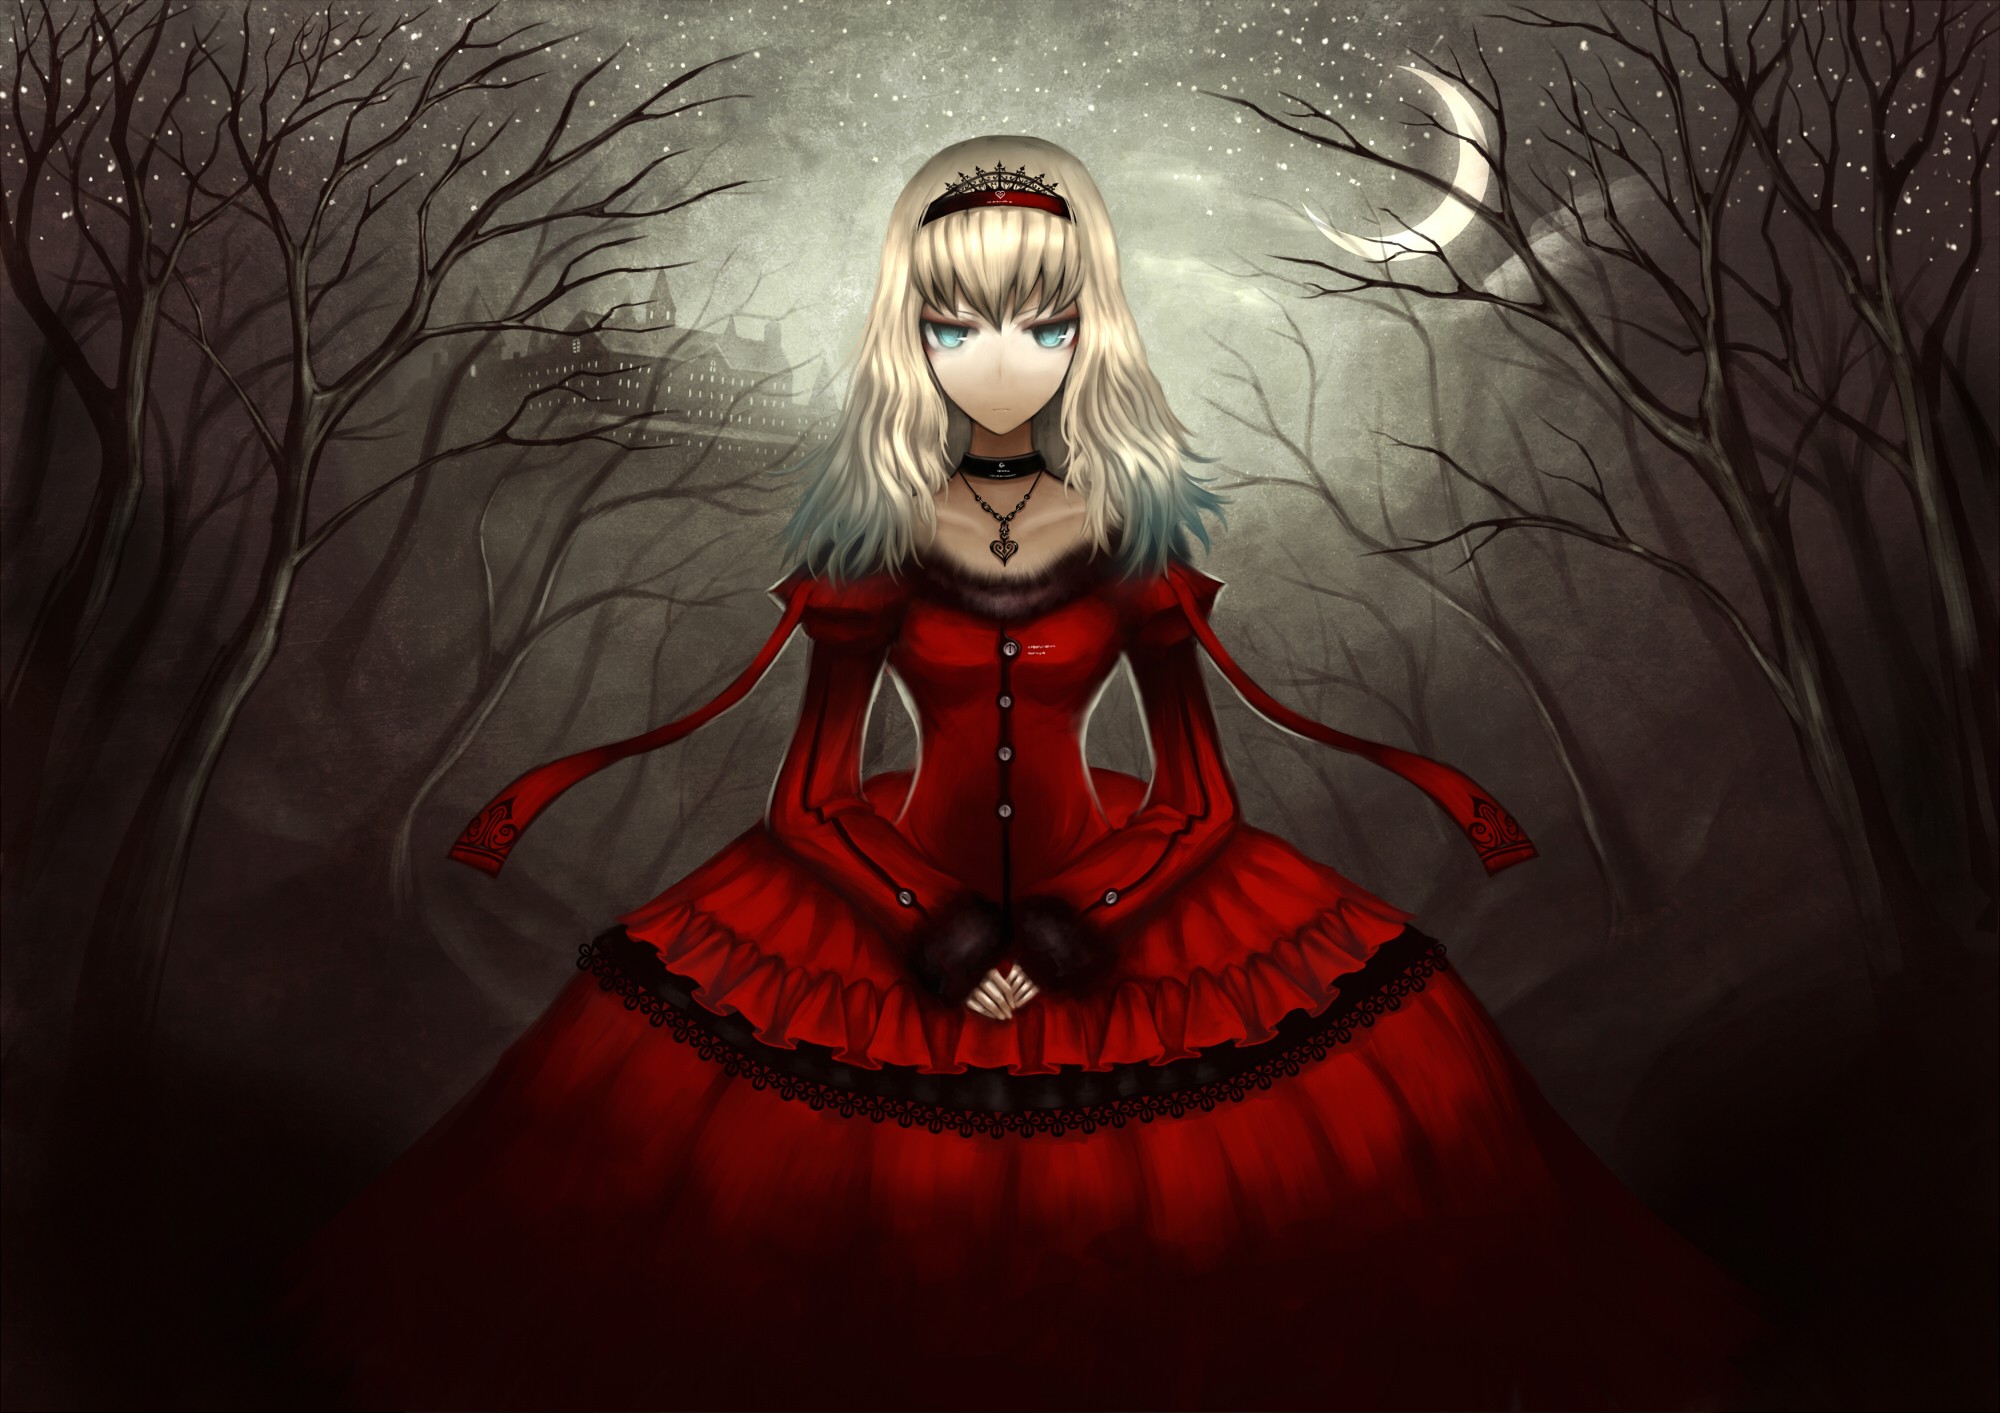 Anime 2000x1413 anime anime girls Alice in Wonderland long hair gray hair blue eyes Moon night forest fantasy girl frontal view centered crescent moon gown women fantasy art Pixiv red clothing